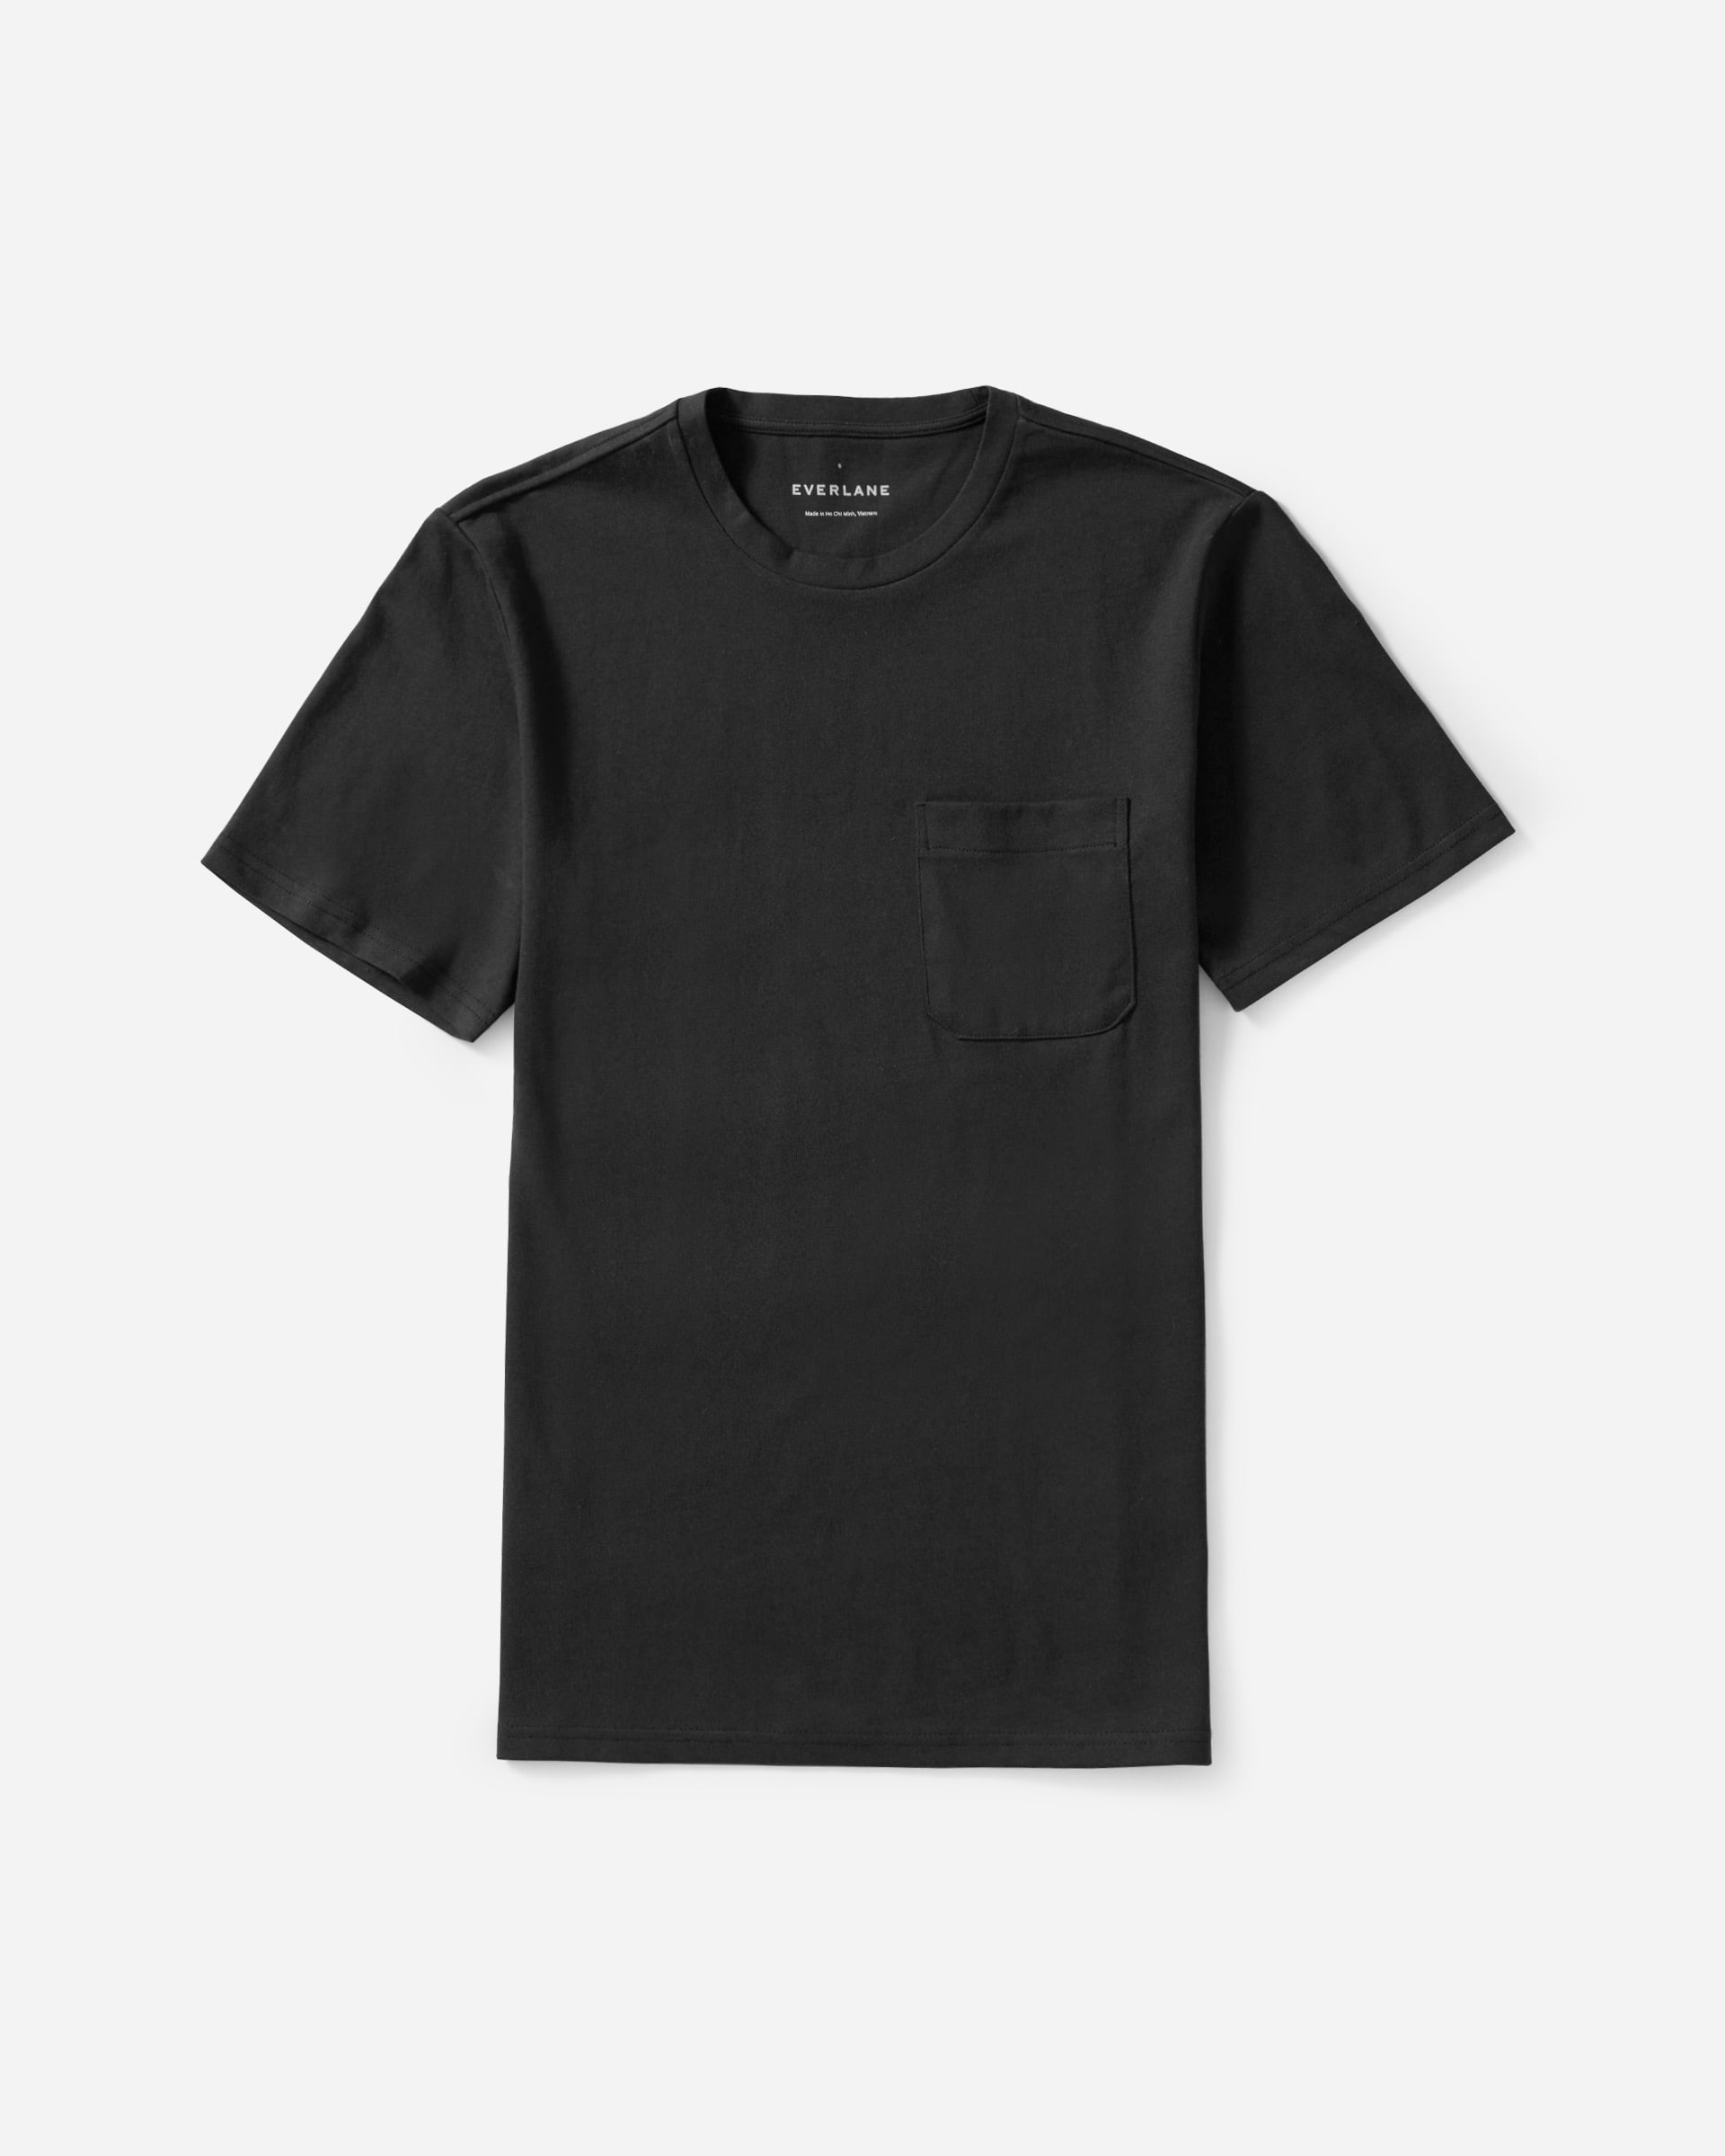 Mens Premium-Weight Pocket T-Shirt | Uniform by Everlane in Black, Size XL Product Image